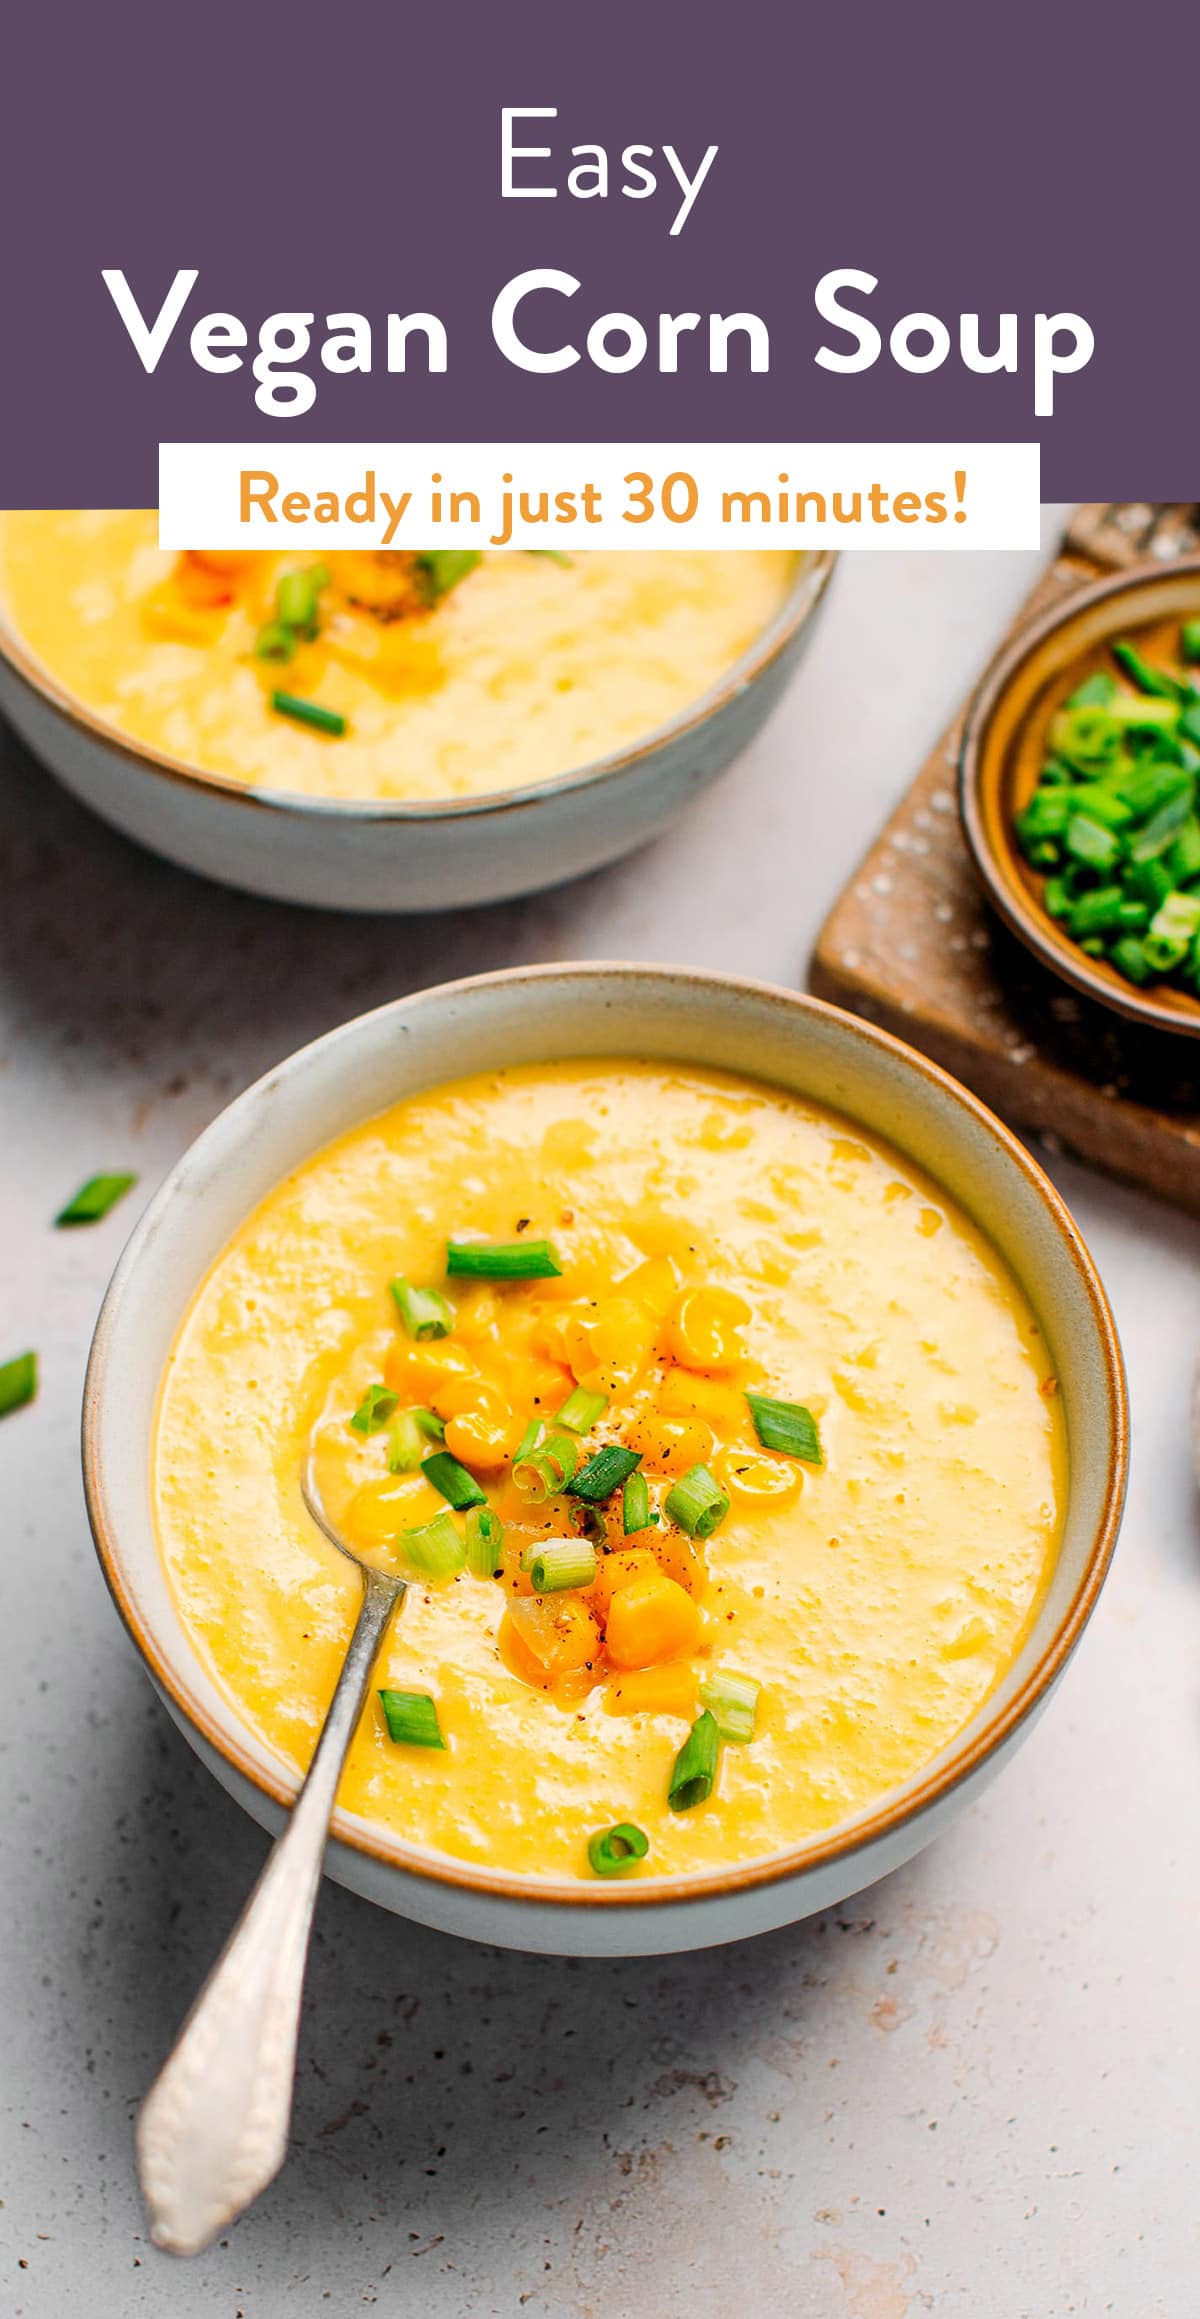 Rich and creamy vegan corn soup that is ready in just 30 minutes with 10 ingredients! A delicious plant-based soup to enjoy this Fall! #corn #vegan #plantbased #soups